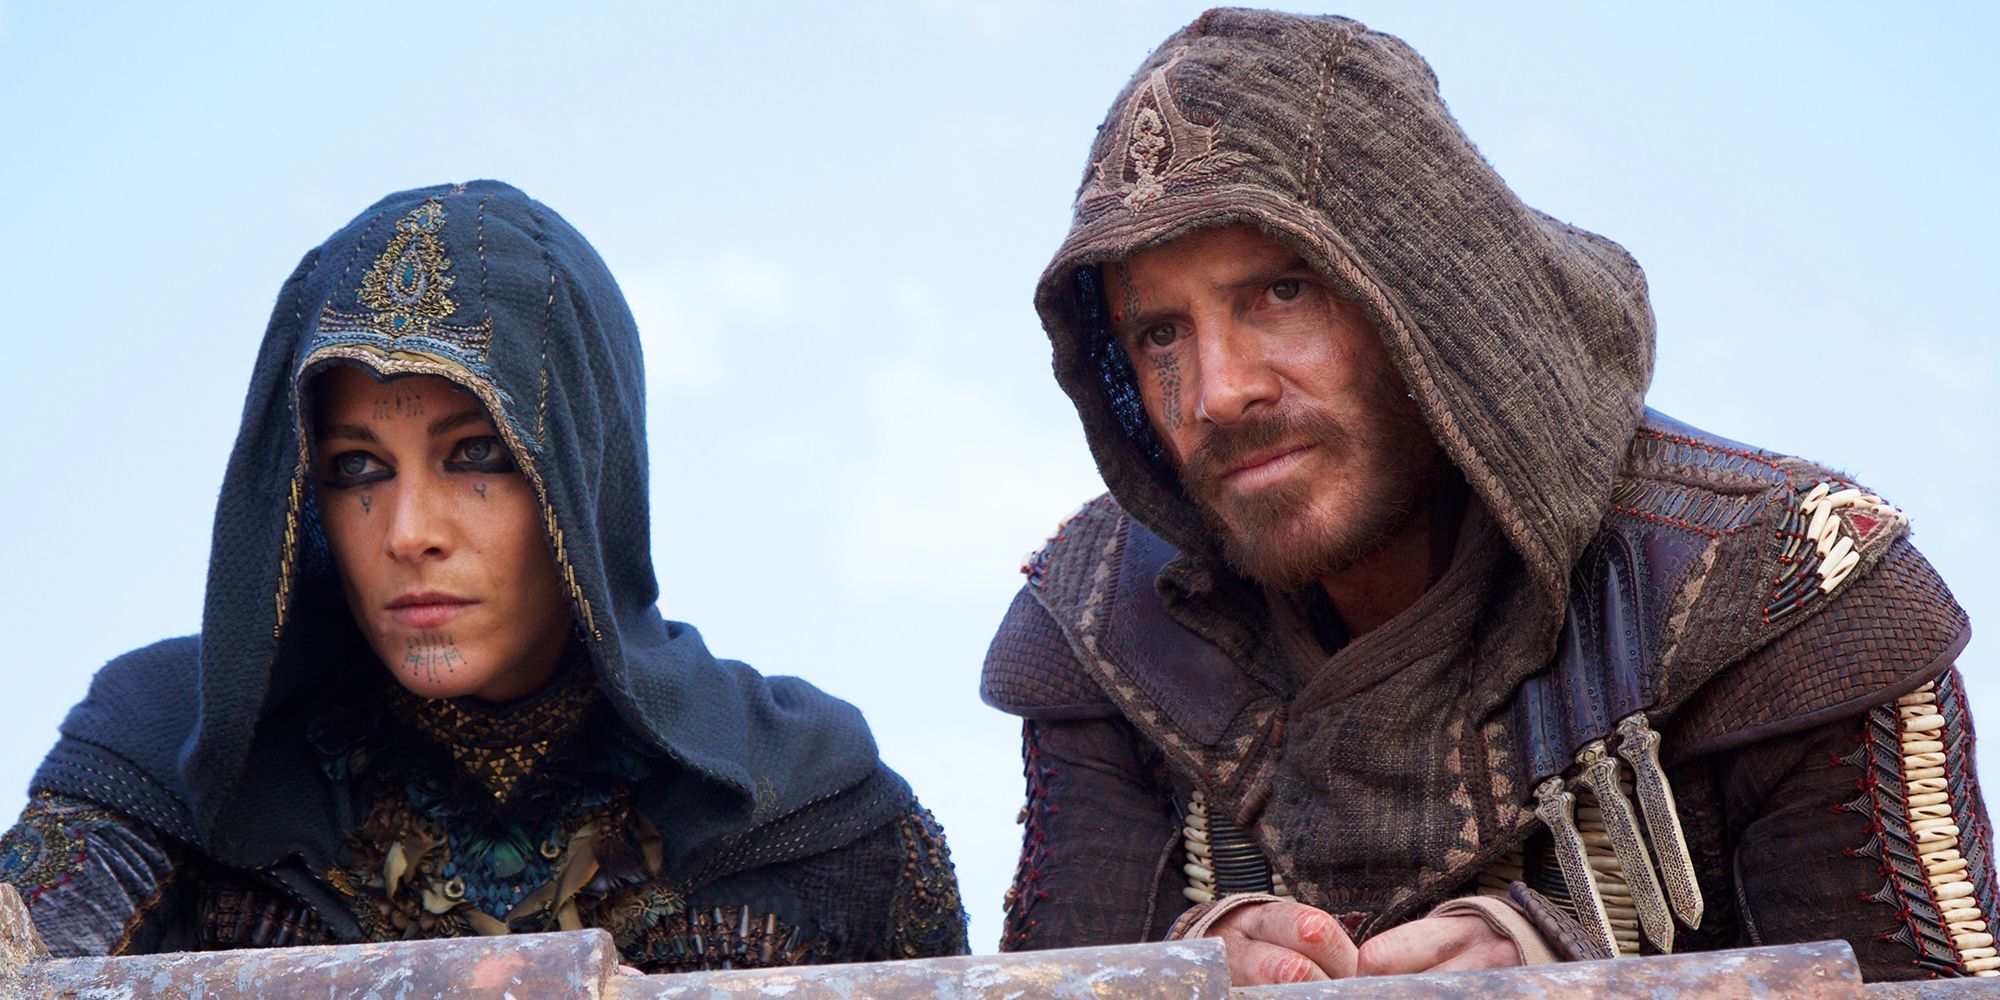 Maria (Ariane Labed) and Aguilar de Nerha (Michael Fassbender) spy from above in the Assassin's Creed Movie